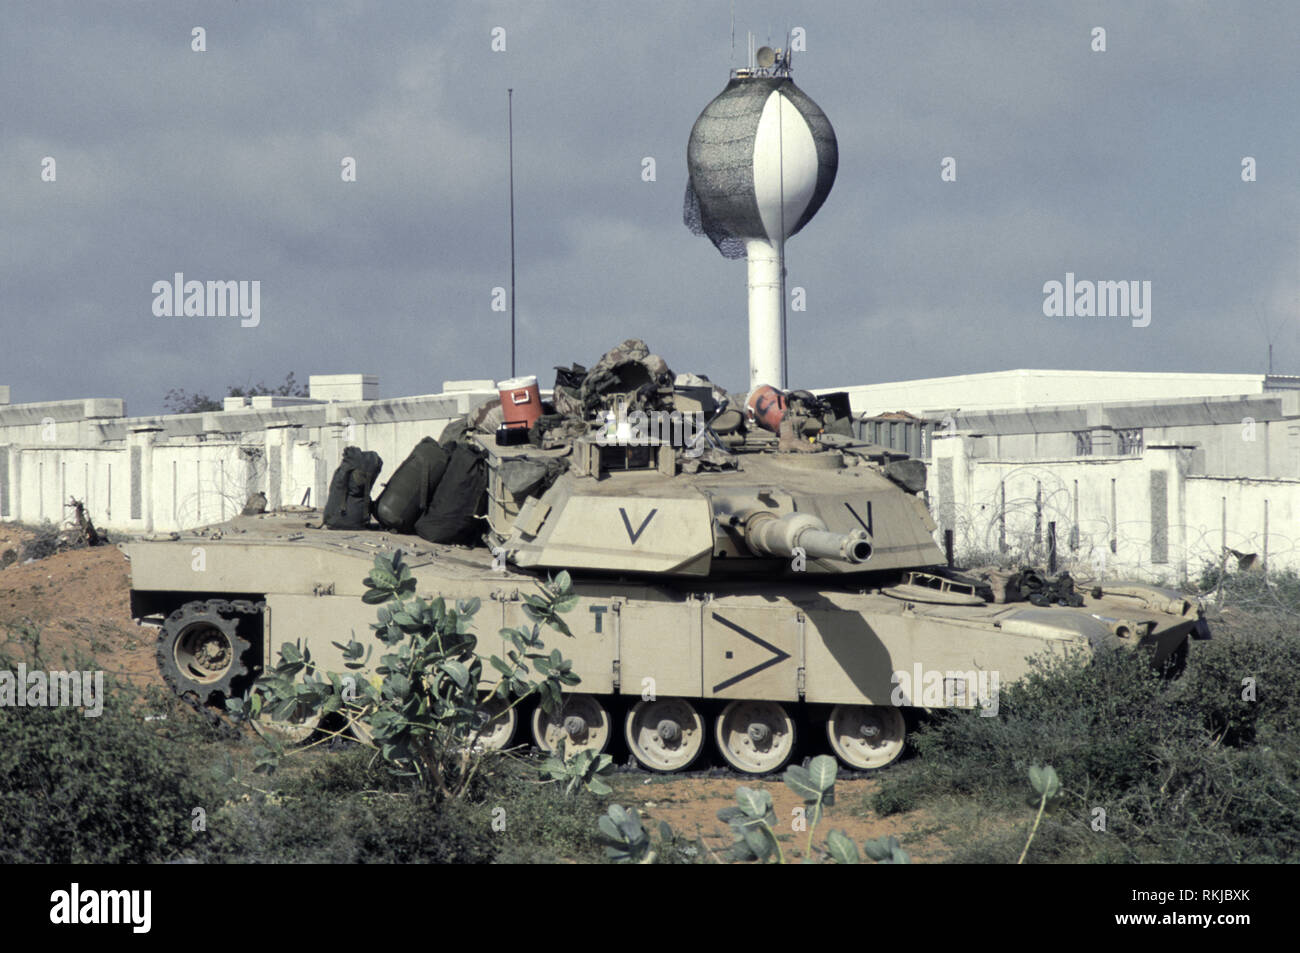 16th October 1993 A U.S. Army M1A1 Abrams tank of the 24th Infantry Division, 1st Battalion of the 64th Armored Regiment at UNOSOM Headquarters in Mogadishu, Somalia. Stock Photo